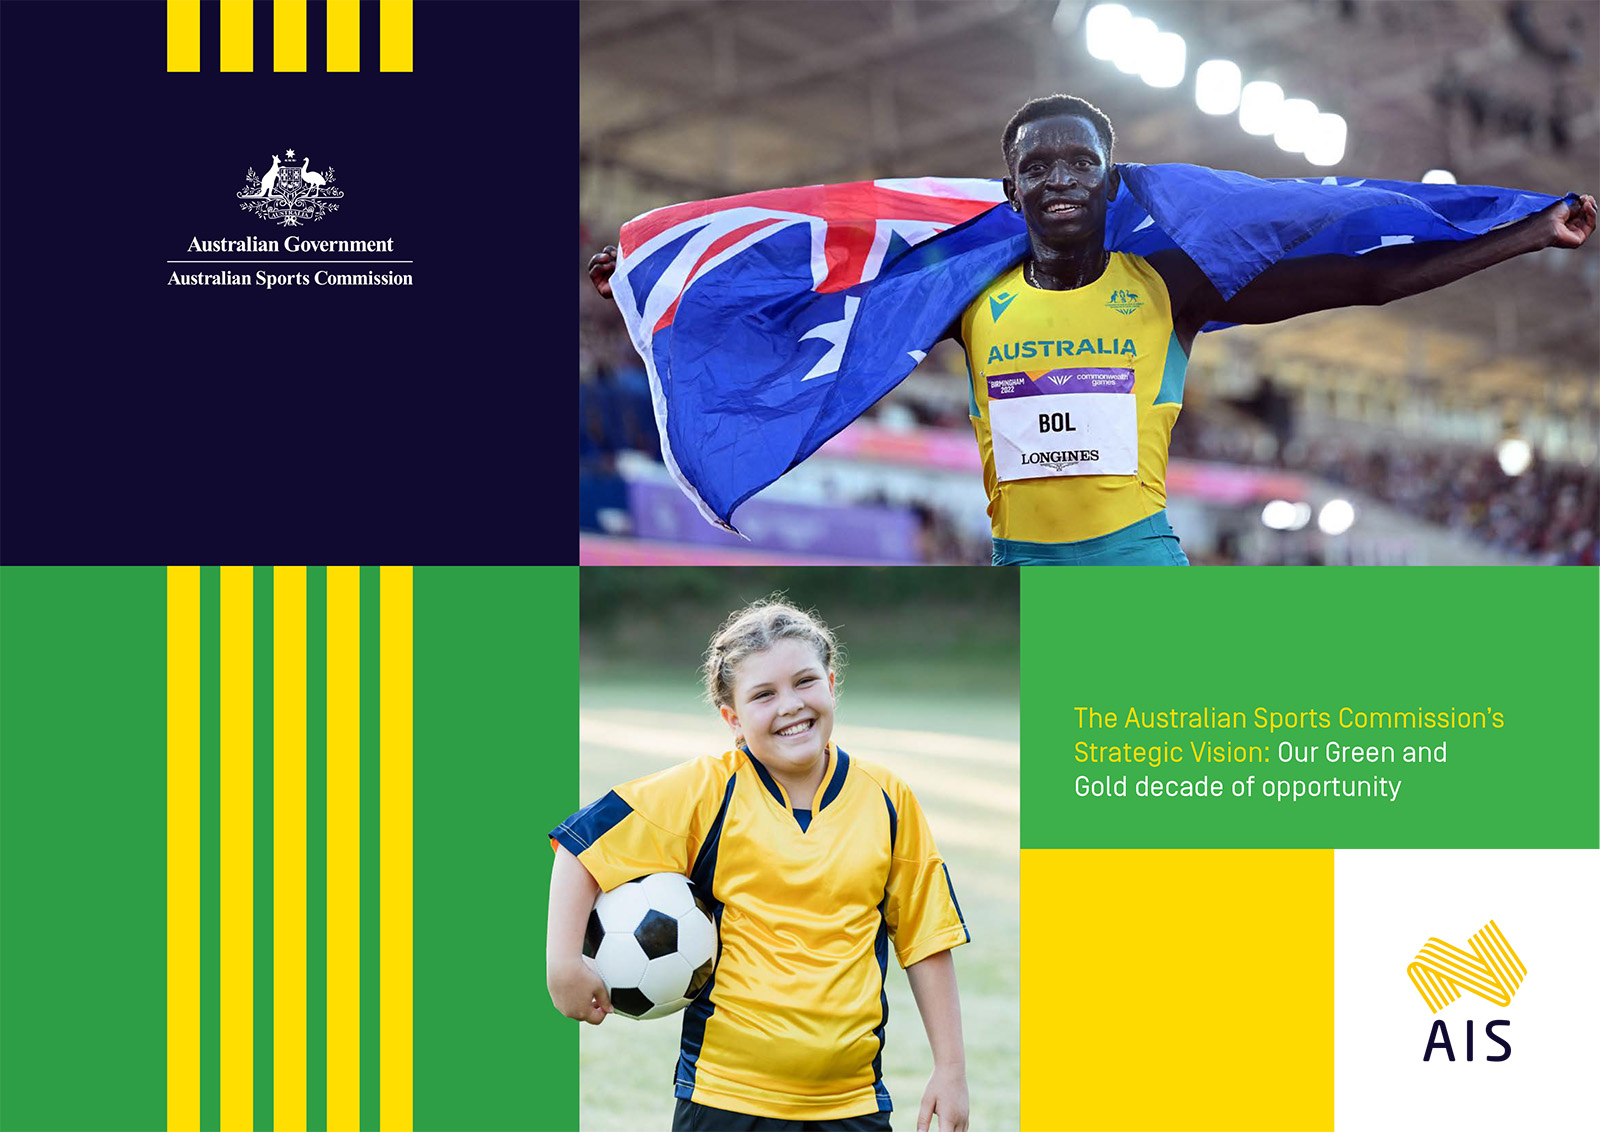 Cover artwork for The Australian Sports Commission's Strategic Vision: Our Green and Gold decade of opportunity, including picture of athlete Peter Bol holding the Australian flag and a young girl holding a football.